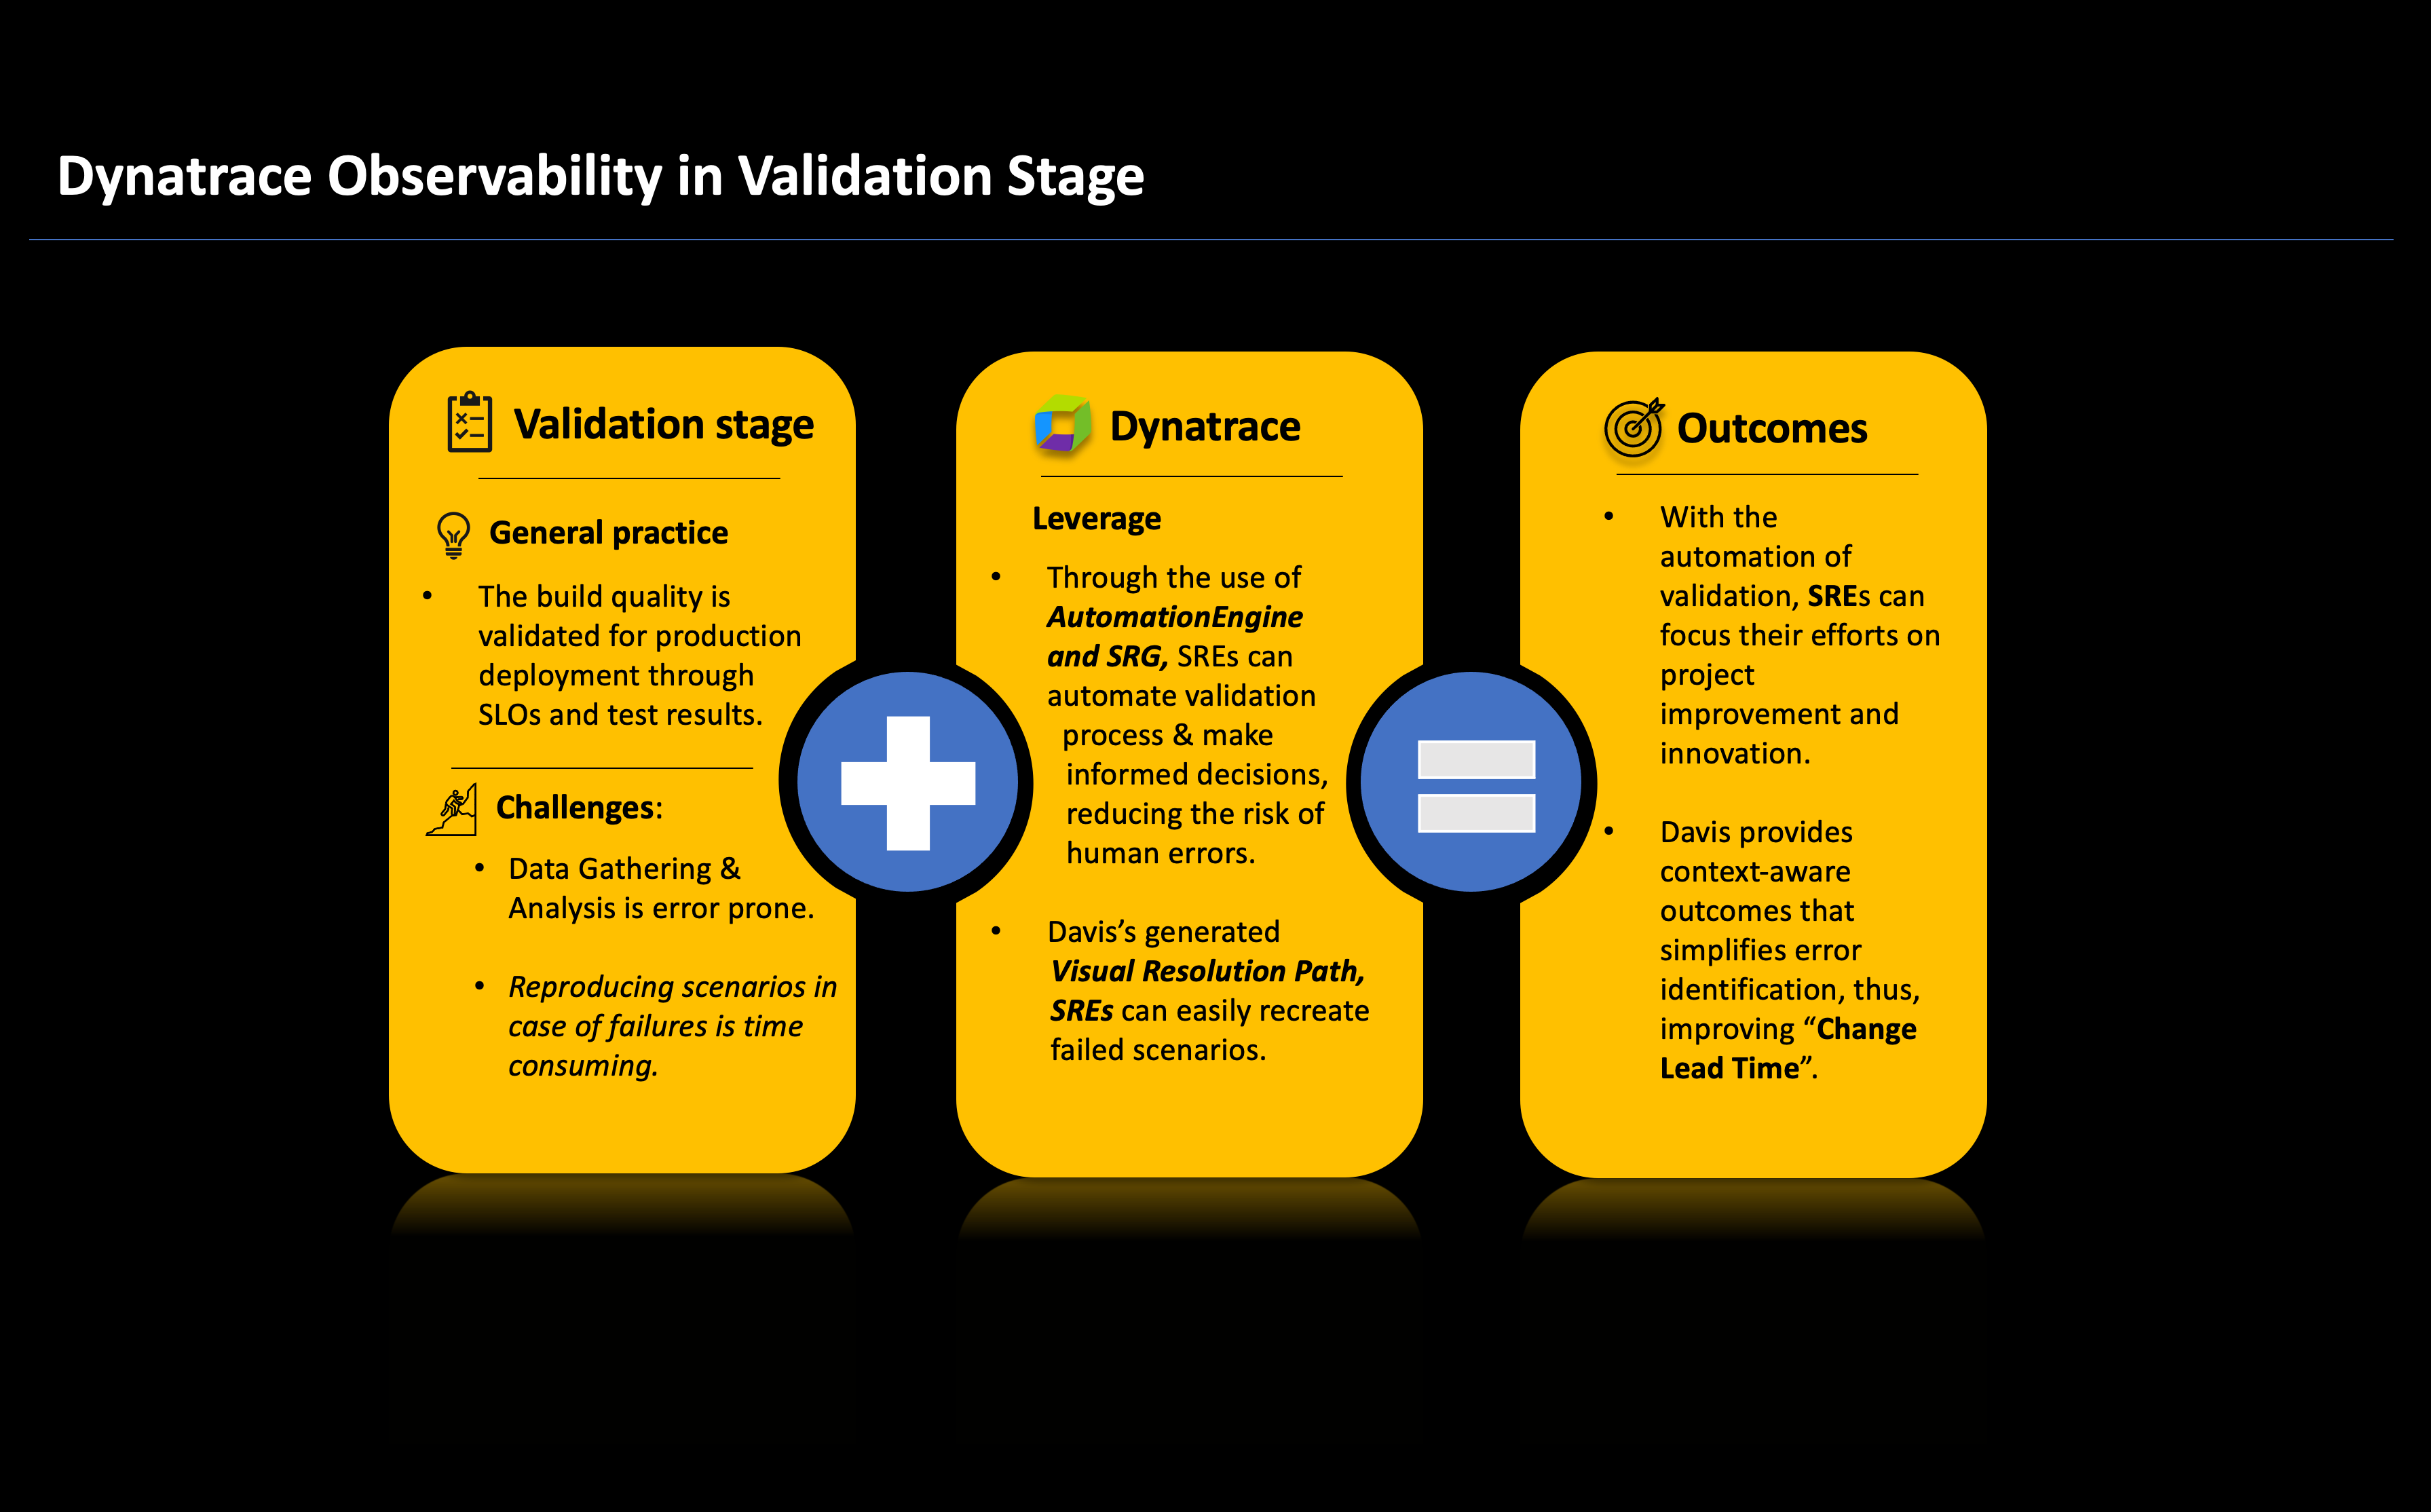 Dynatrace observability in validation stage